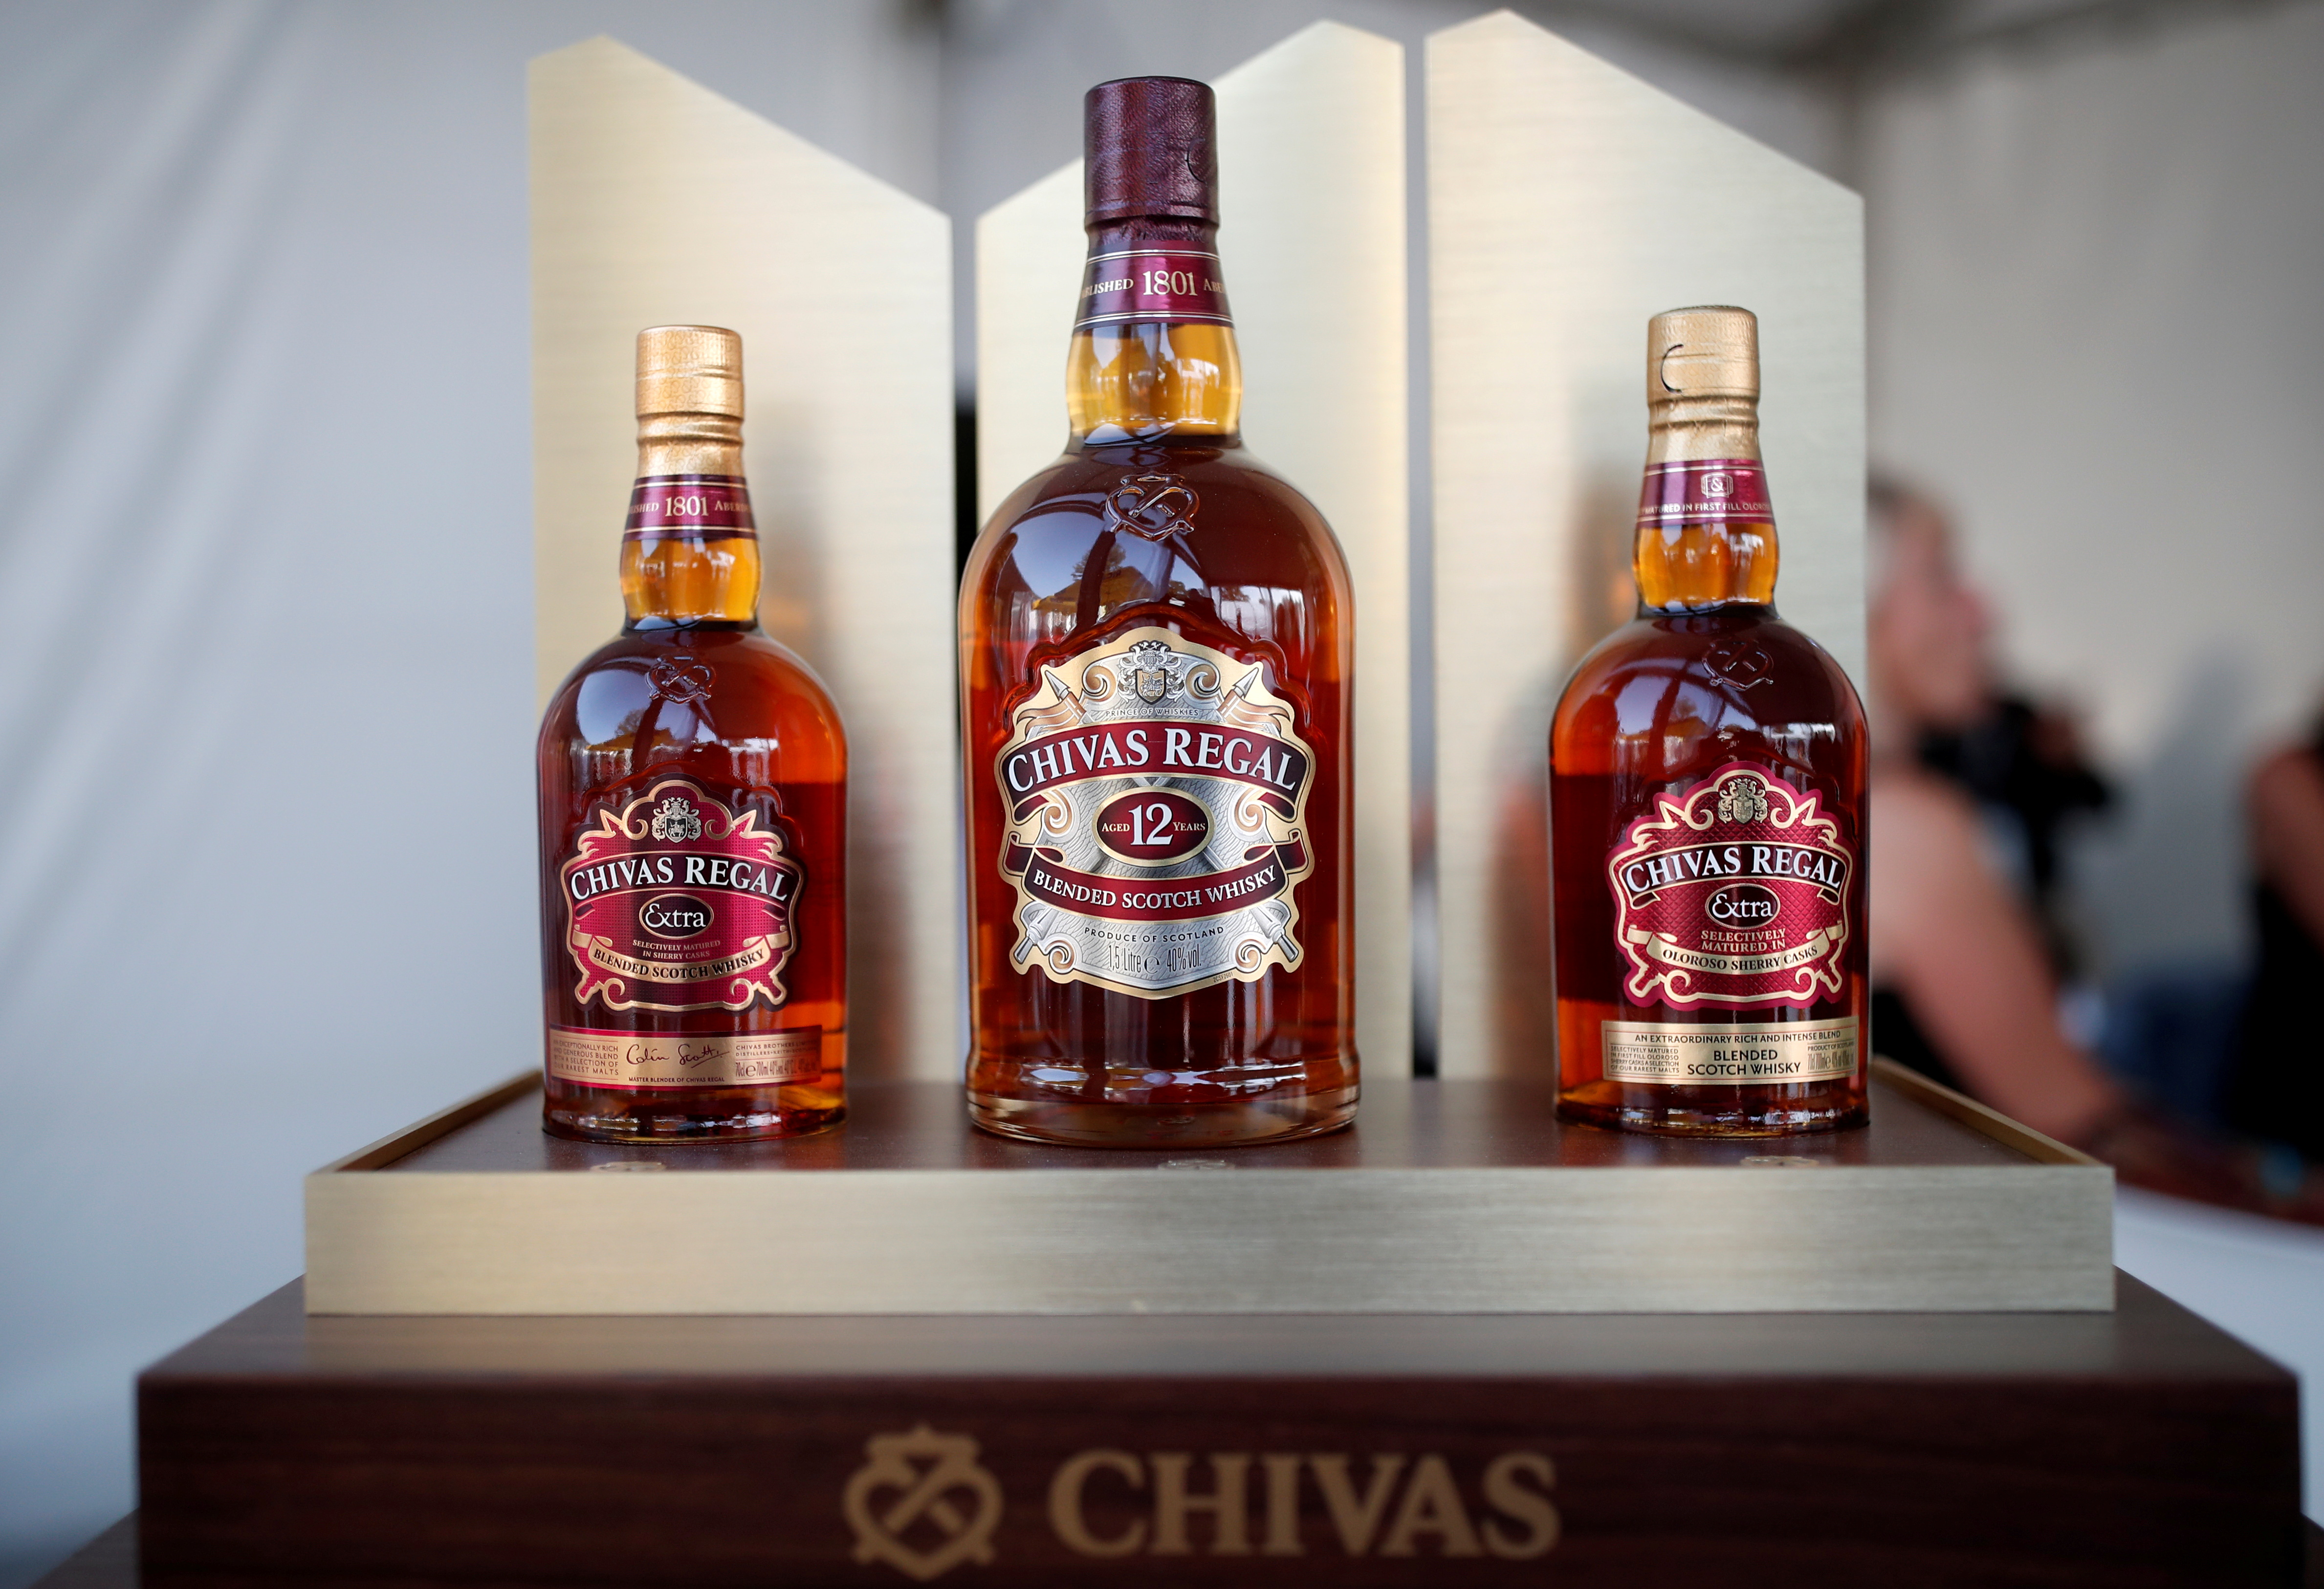 Bottles of Chivas Regal blended Scotch whisky, produced by Pernod Ricard SA, are displayed on the campus of the HEC School of Management in Jouy-en-Josas, near Paris